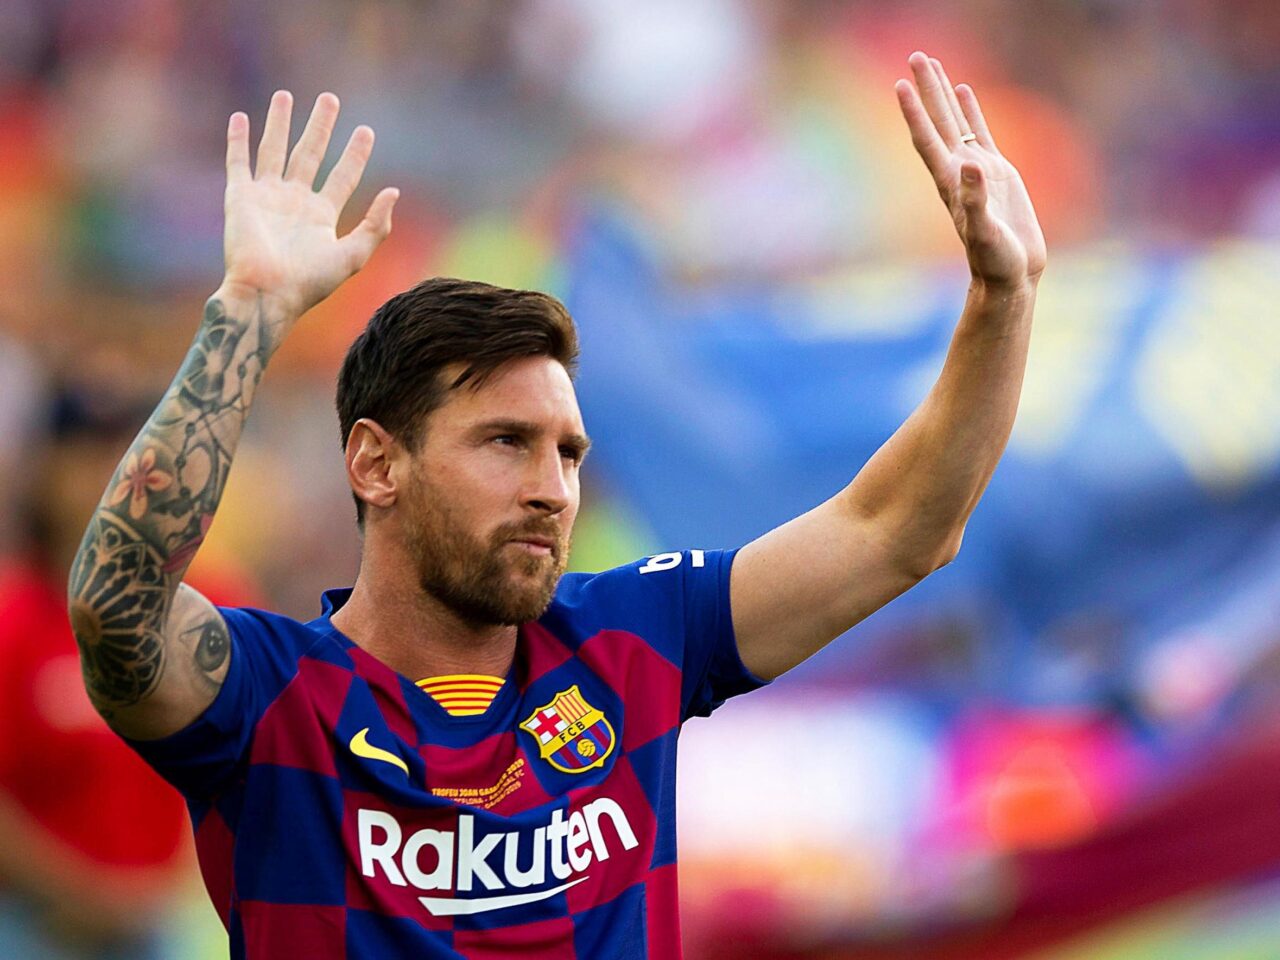 Messi transfer: will Barca star join ManCity?